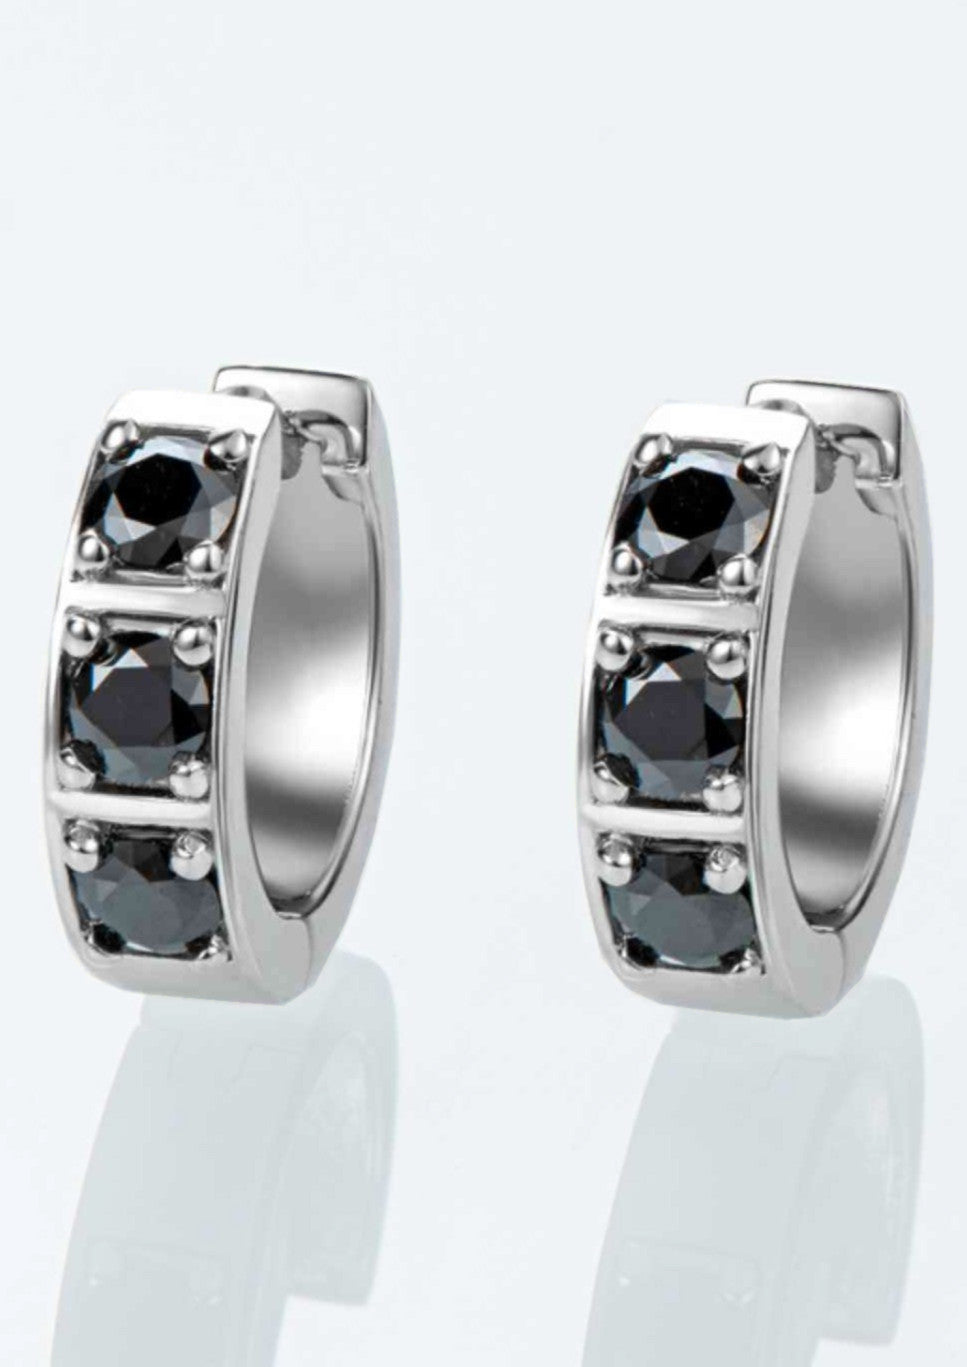 INLAID MOISSANITE HUGGIE EARRINGS in Platinum Plated Sterling Silver and Black or White Moissanite stones